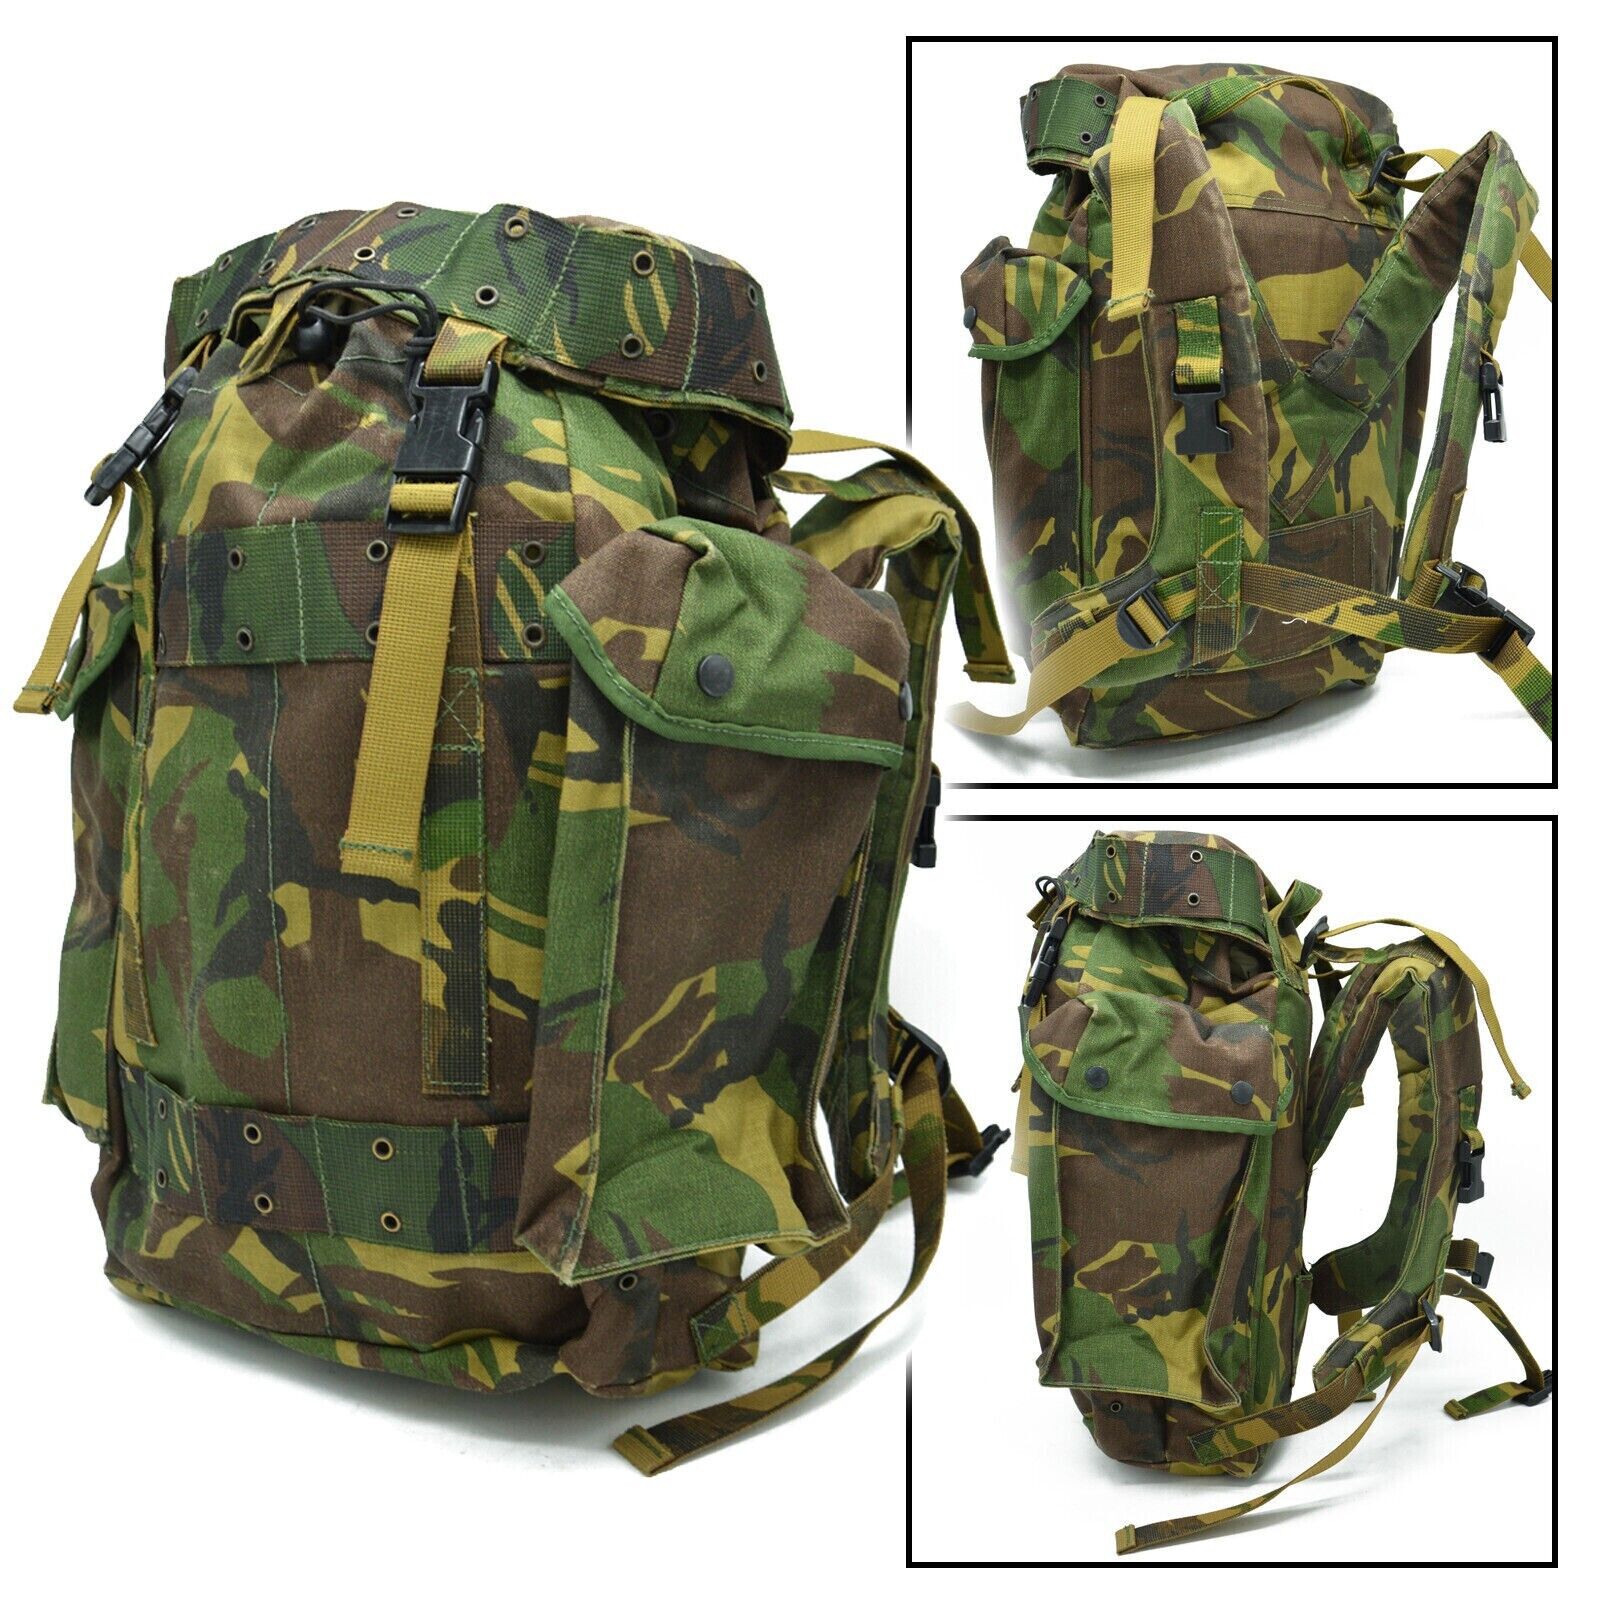 Dutch Armed Forces DPM Pattern Daypack